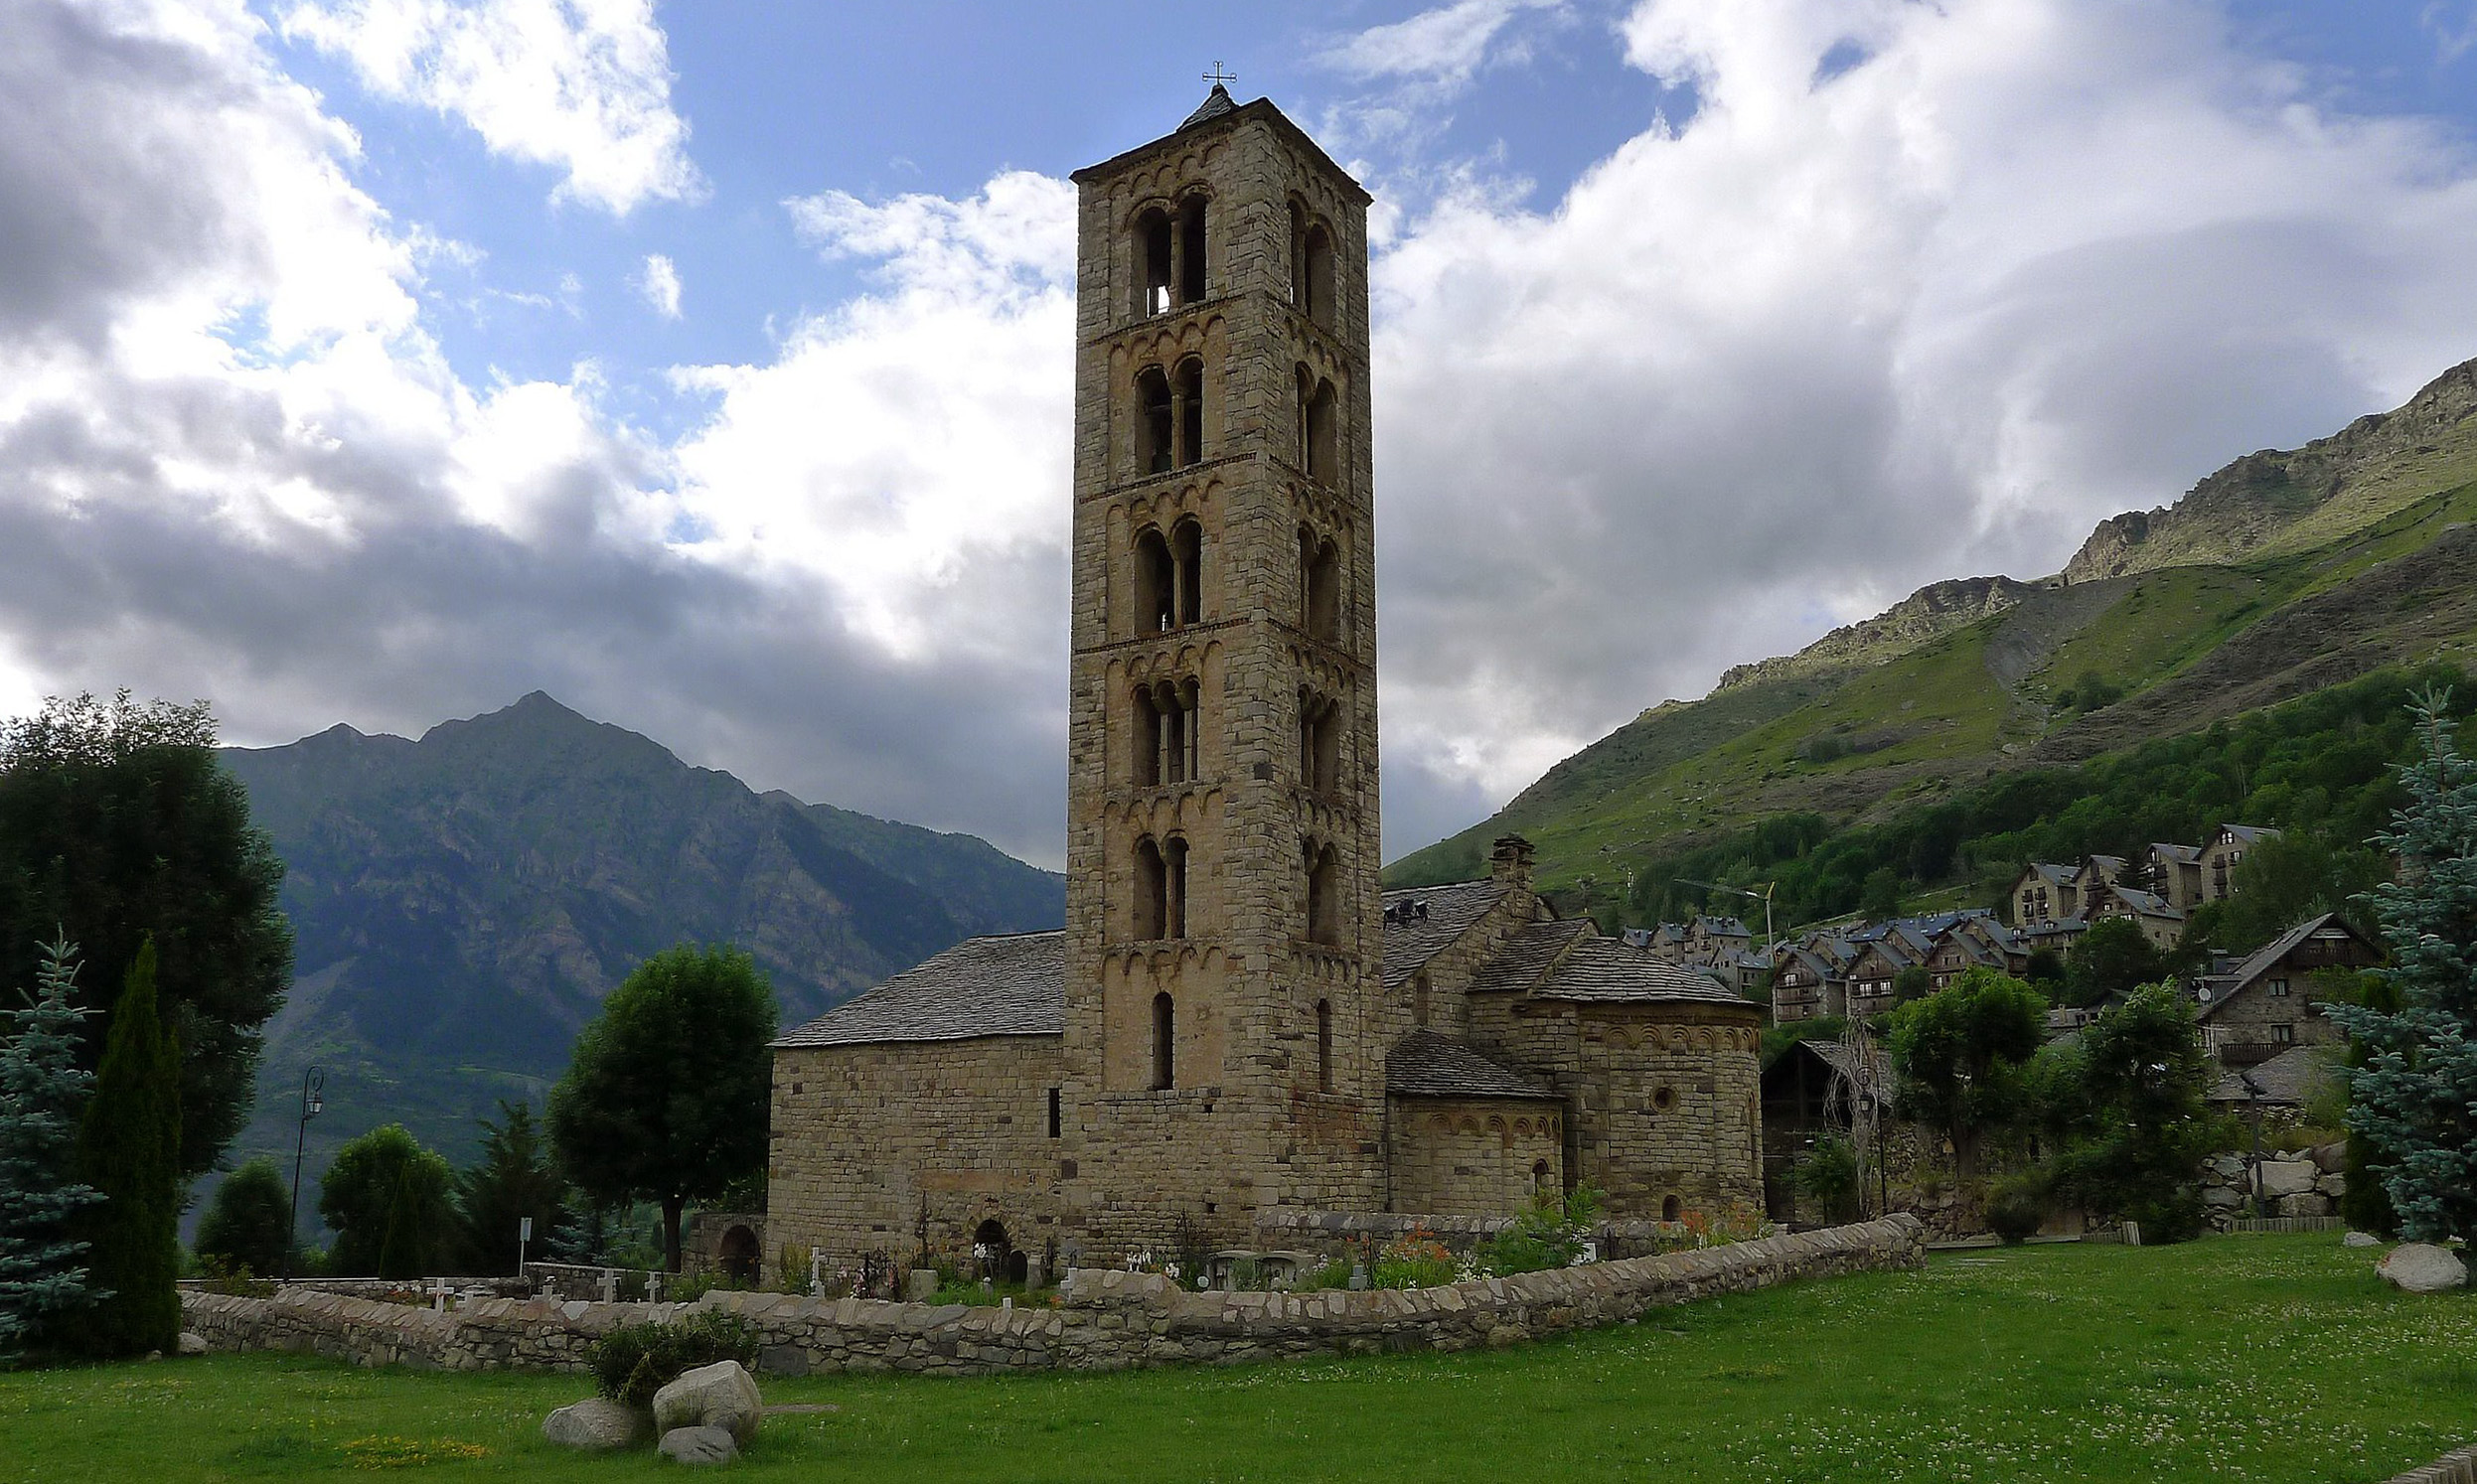 Sant Climent (Saint Clement in Catalan), outside the village of Taüll, Boí valley, Spain